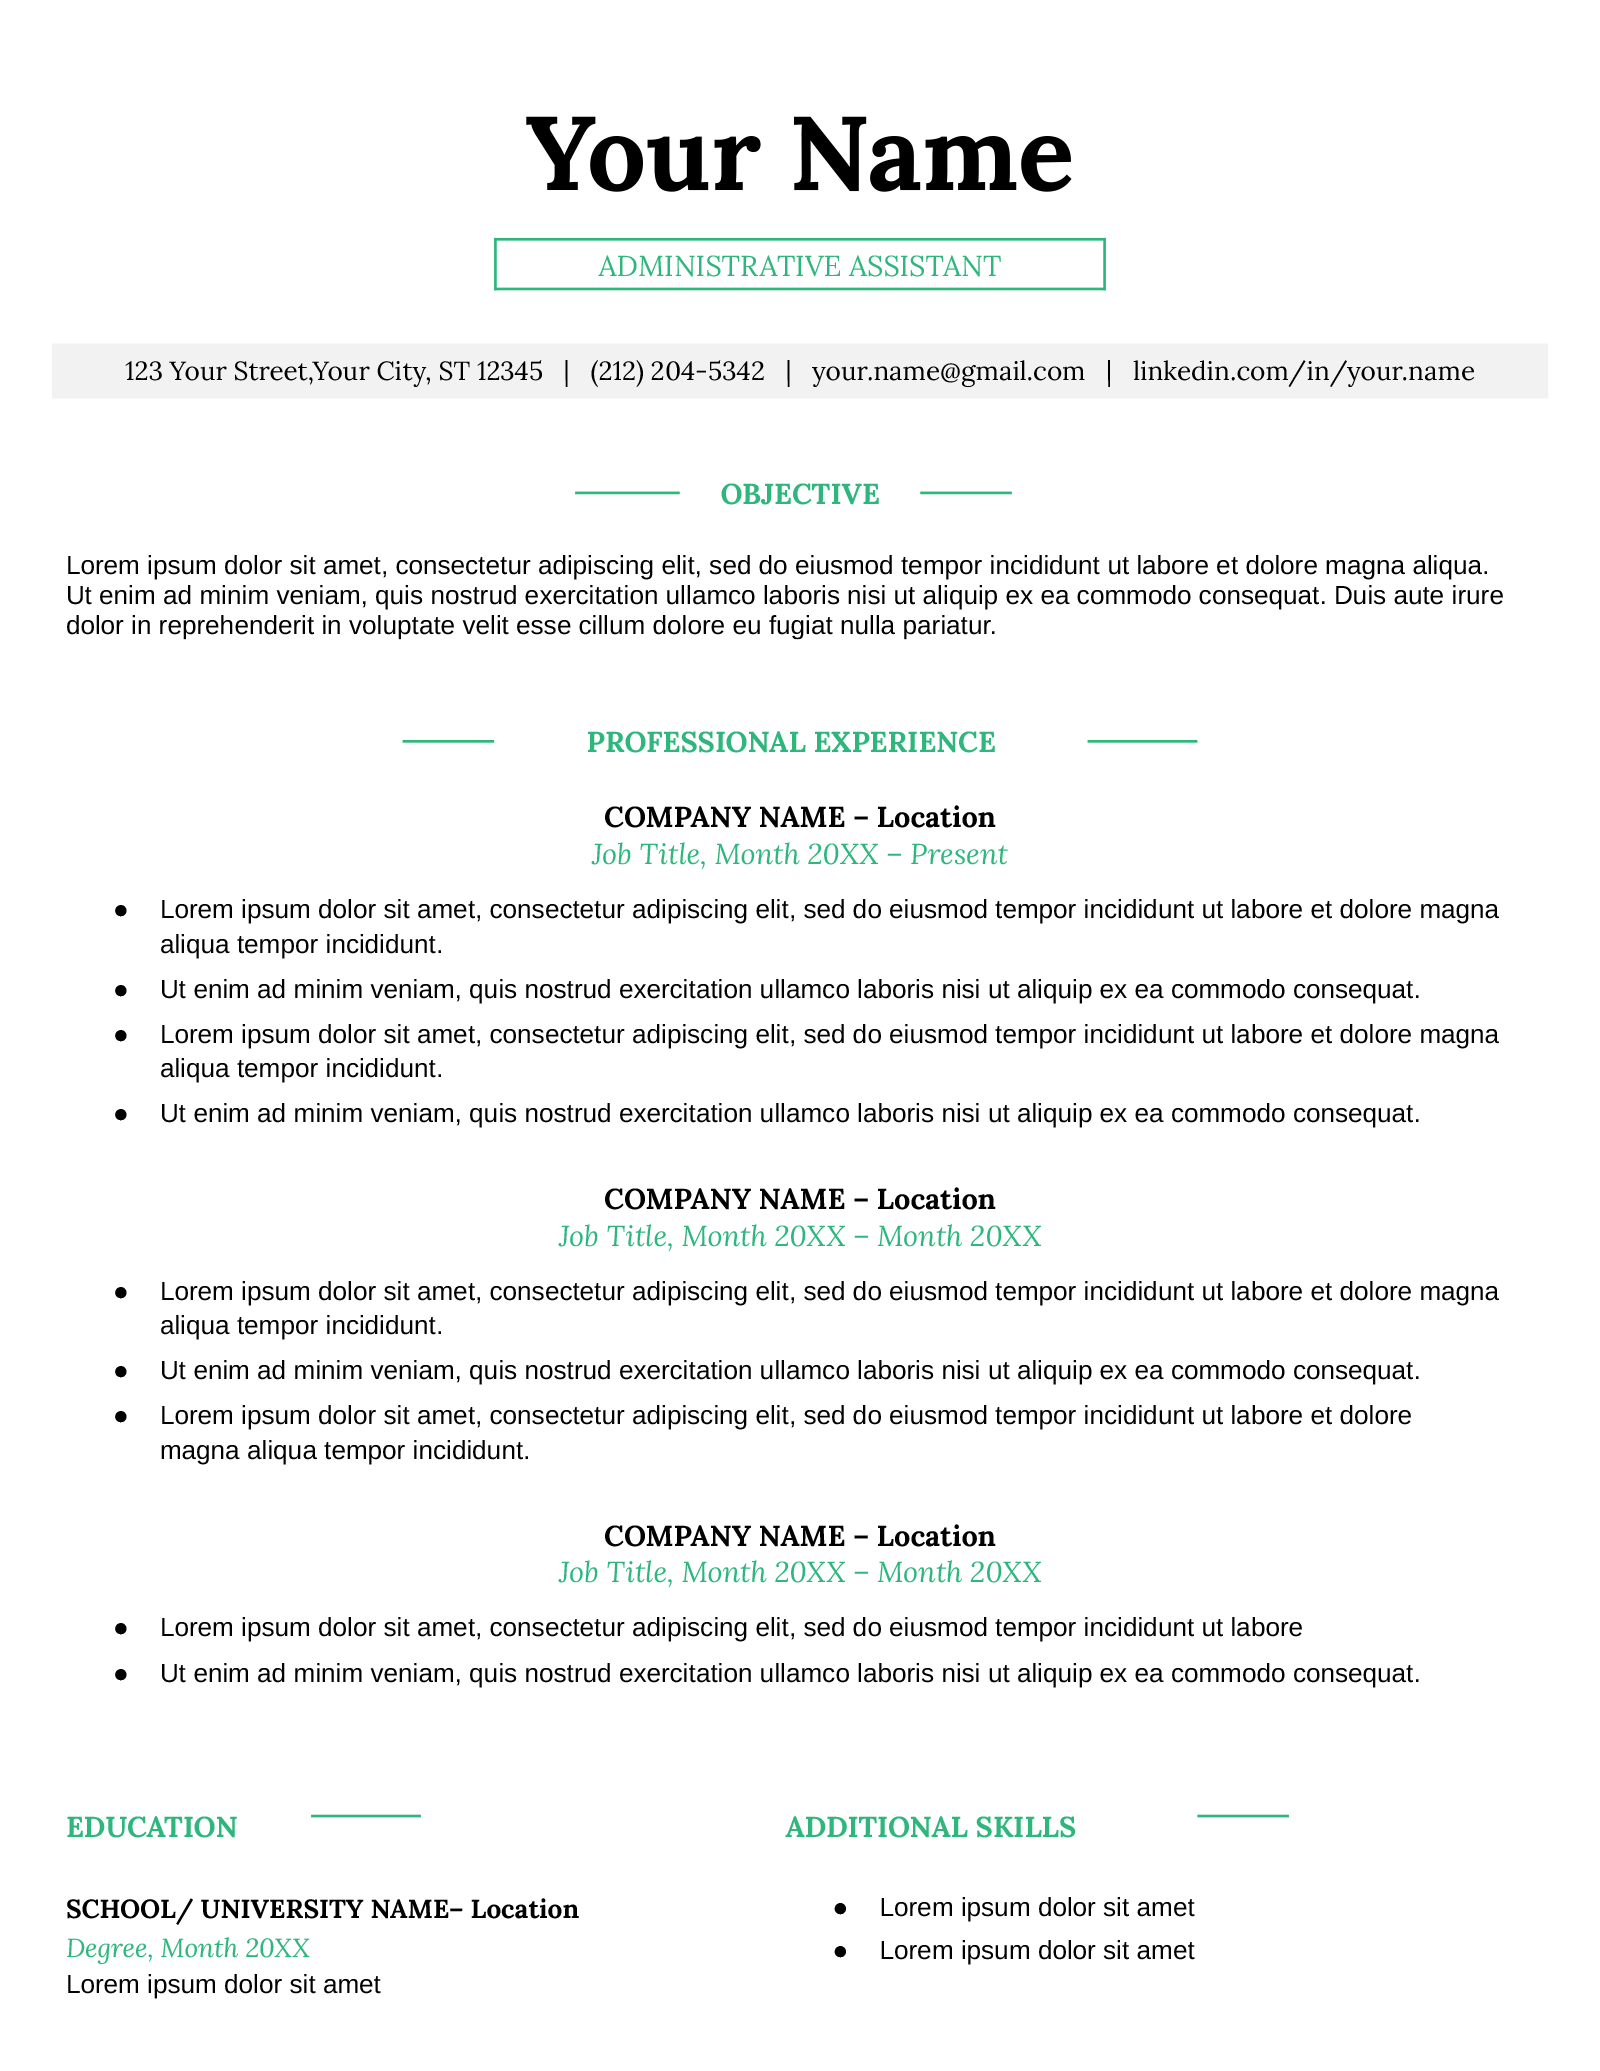 An example of the &quot;Online&quot; resume template in Google Docs